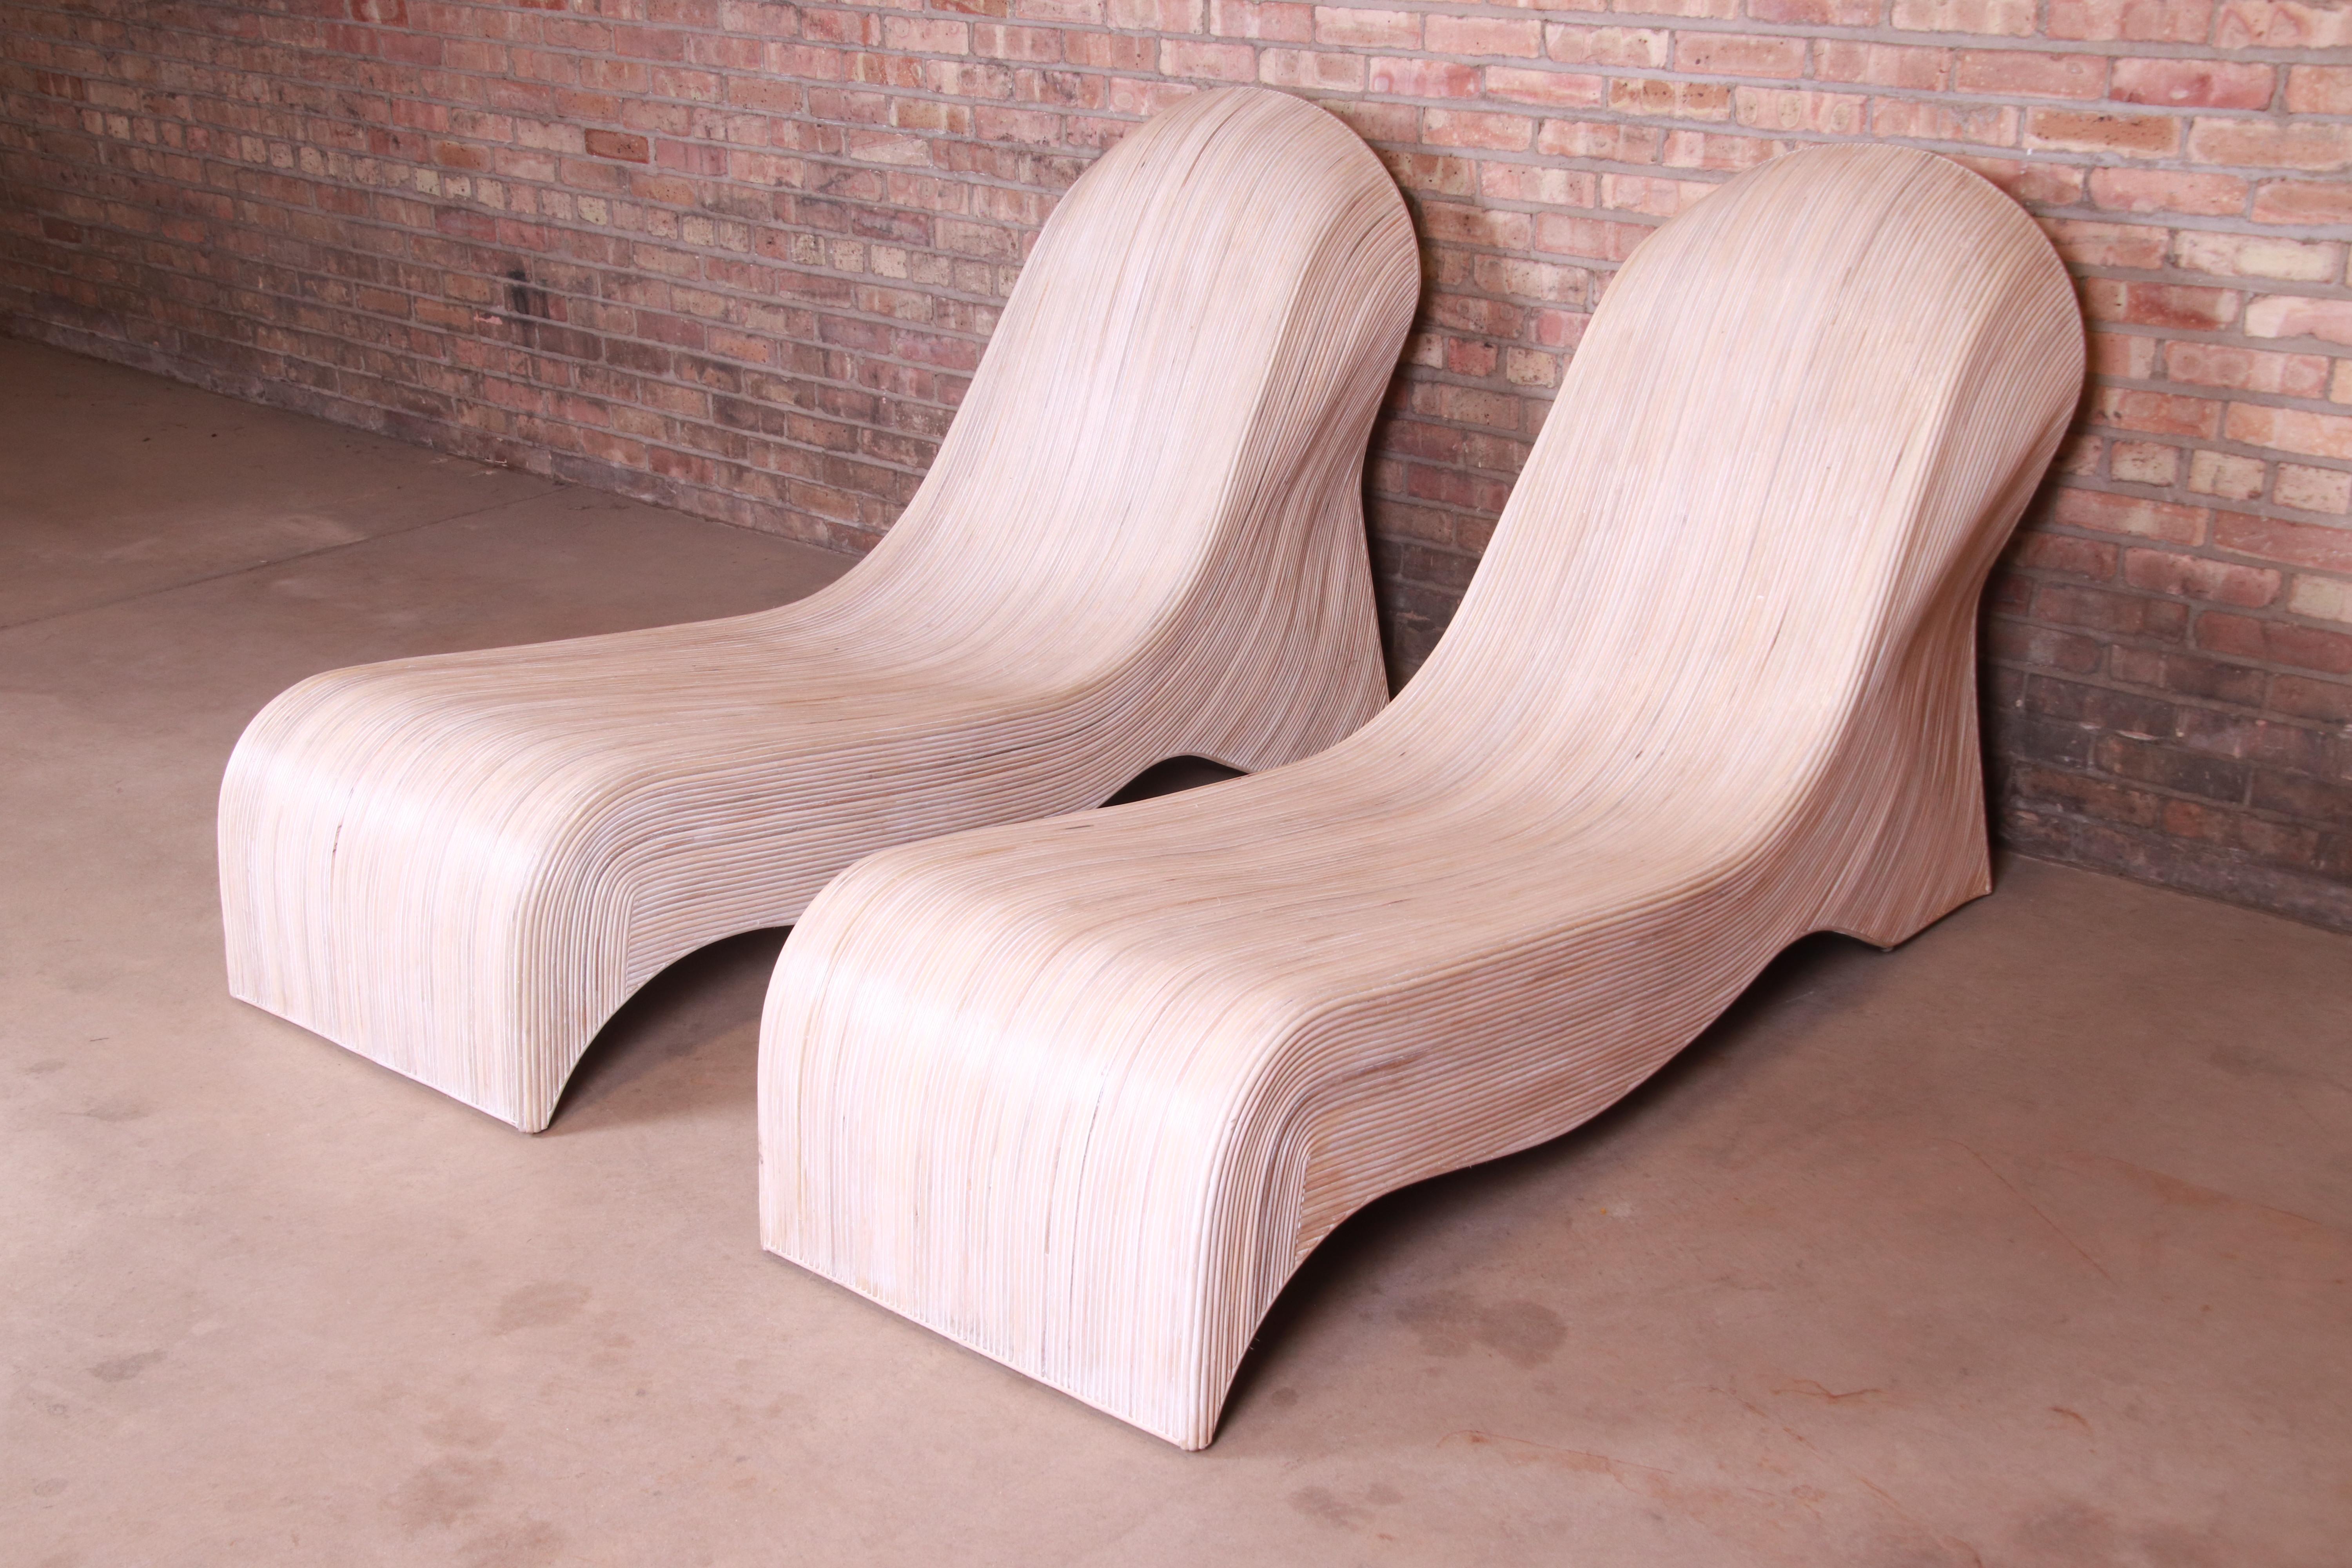 A gorgeous pair of sculptural organic modern split reed rattan chaise lounges

By Betty Cobonpue, 